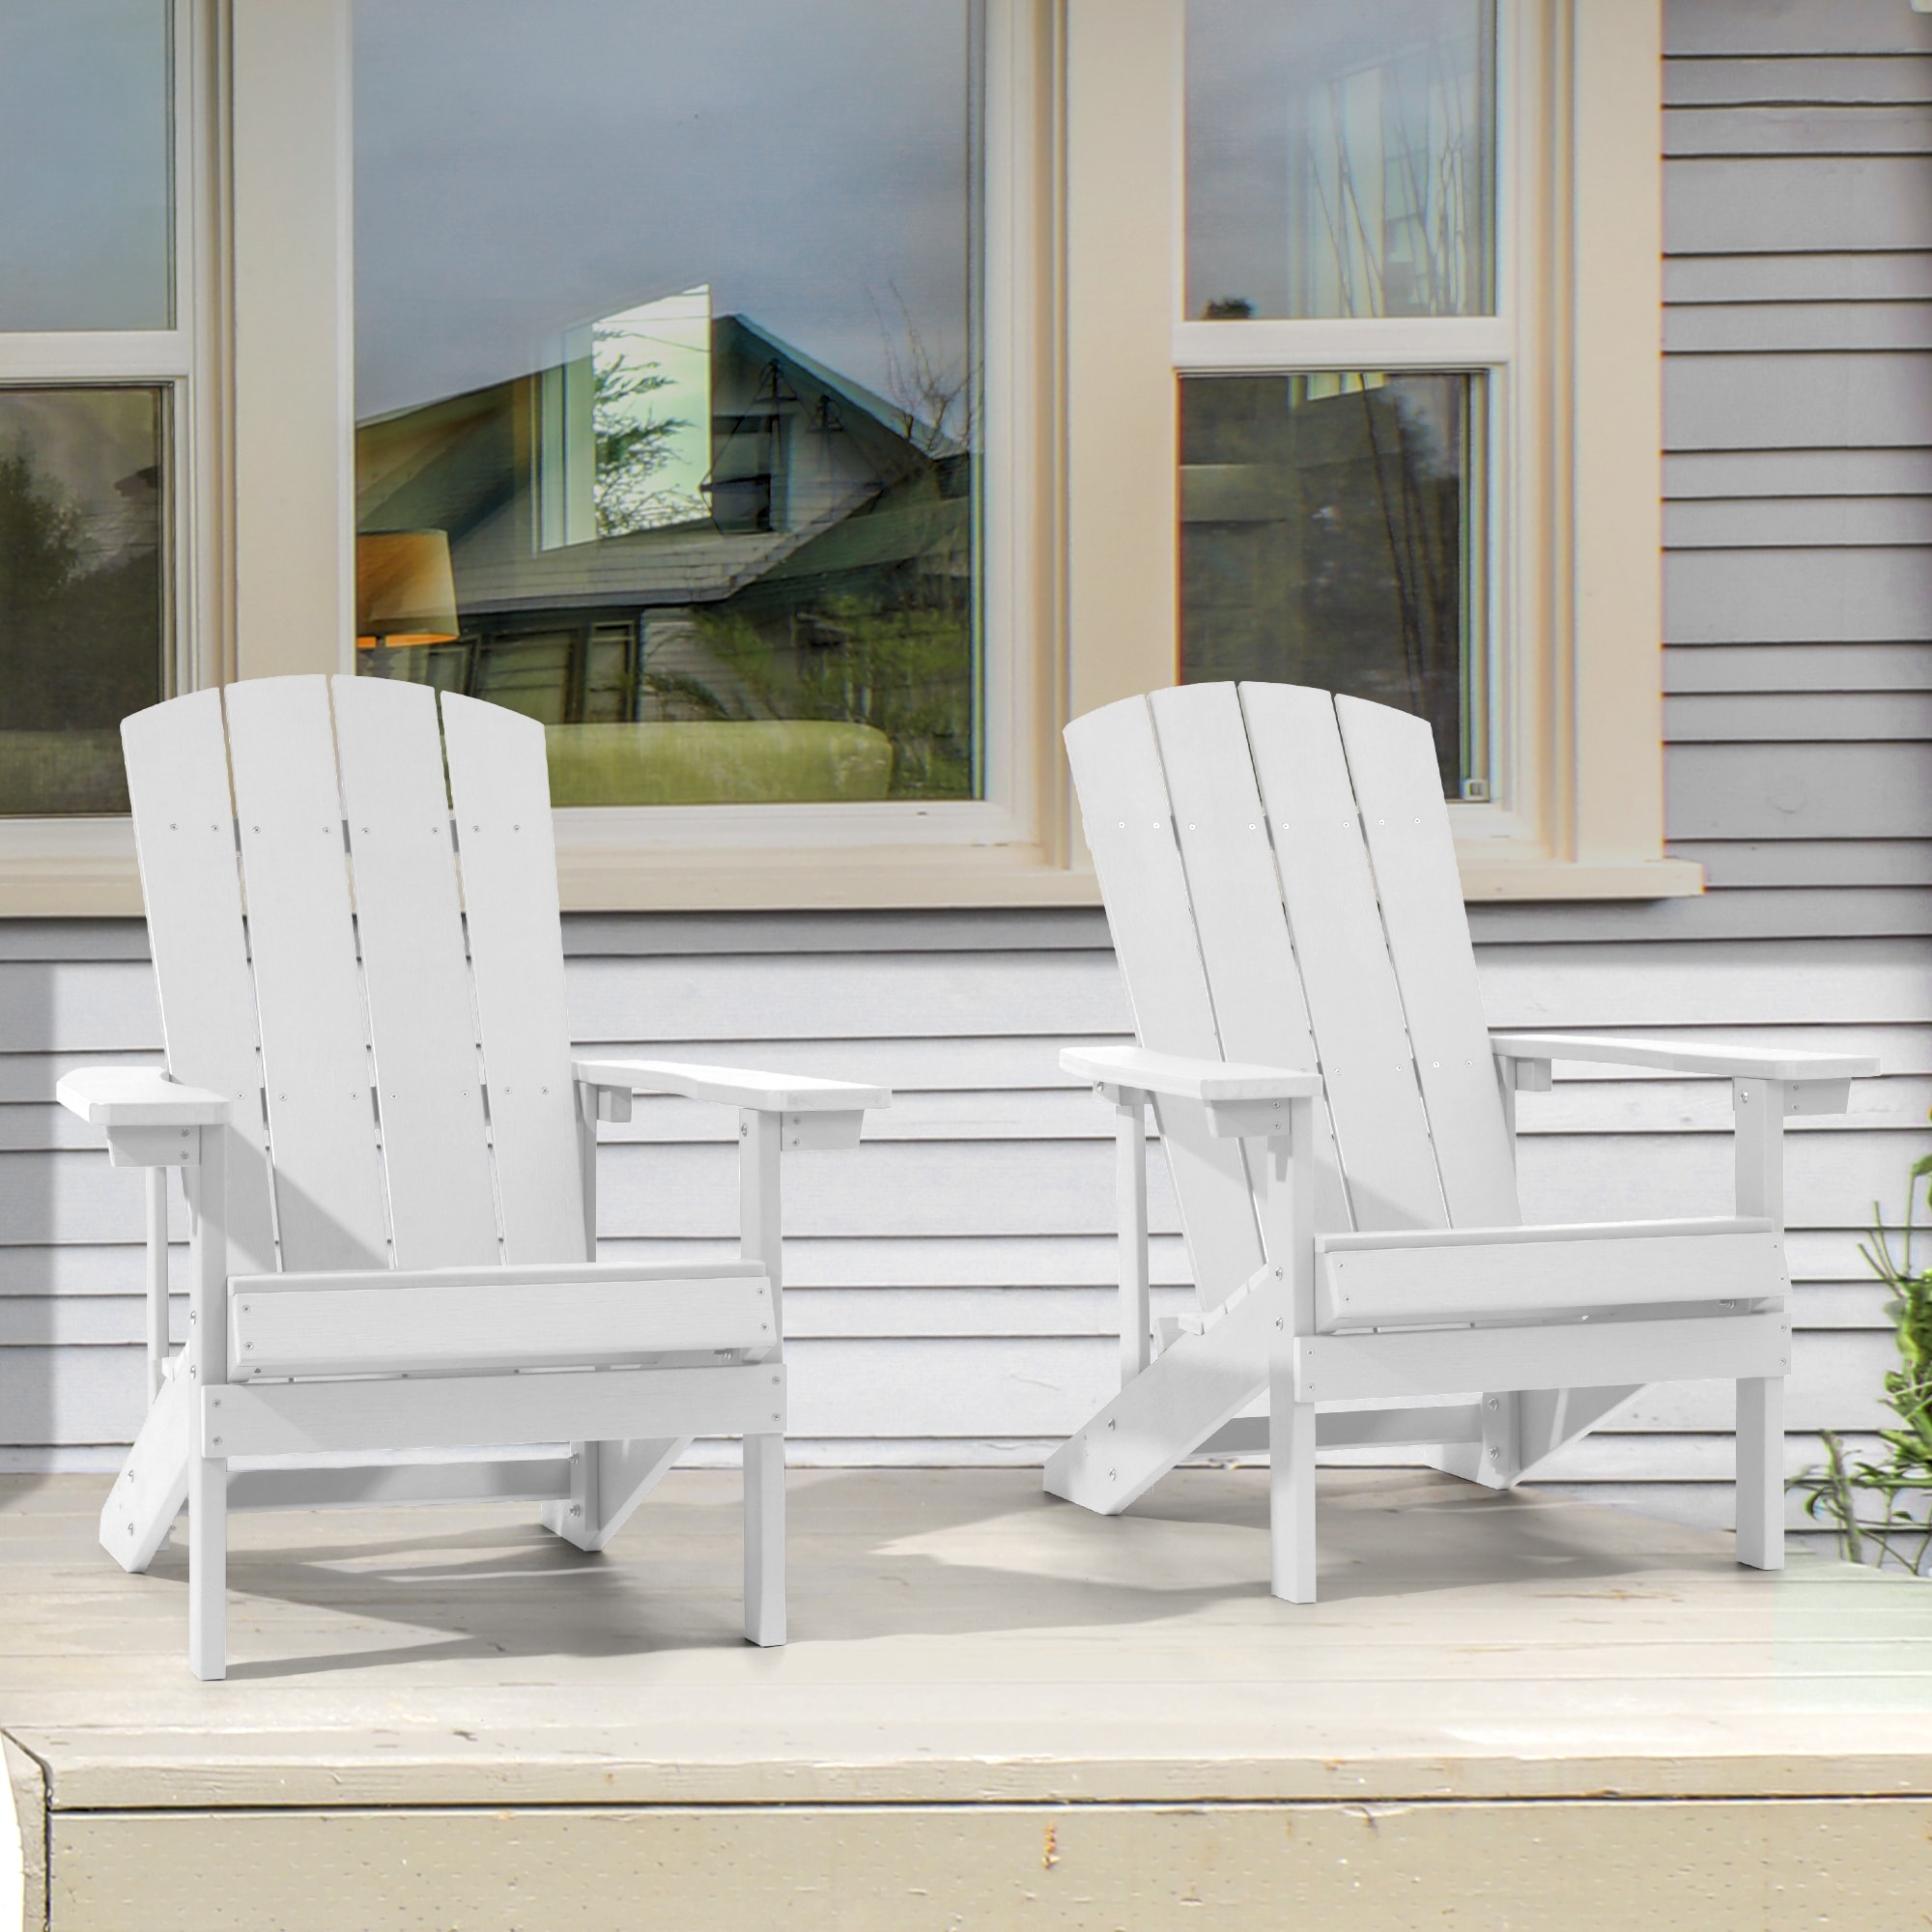 Aoolimics Outdoor Adirondack Chair Patio Plastic Single Chair-set Of 2